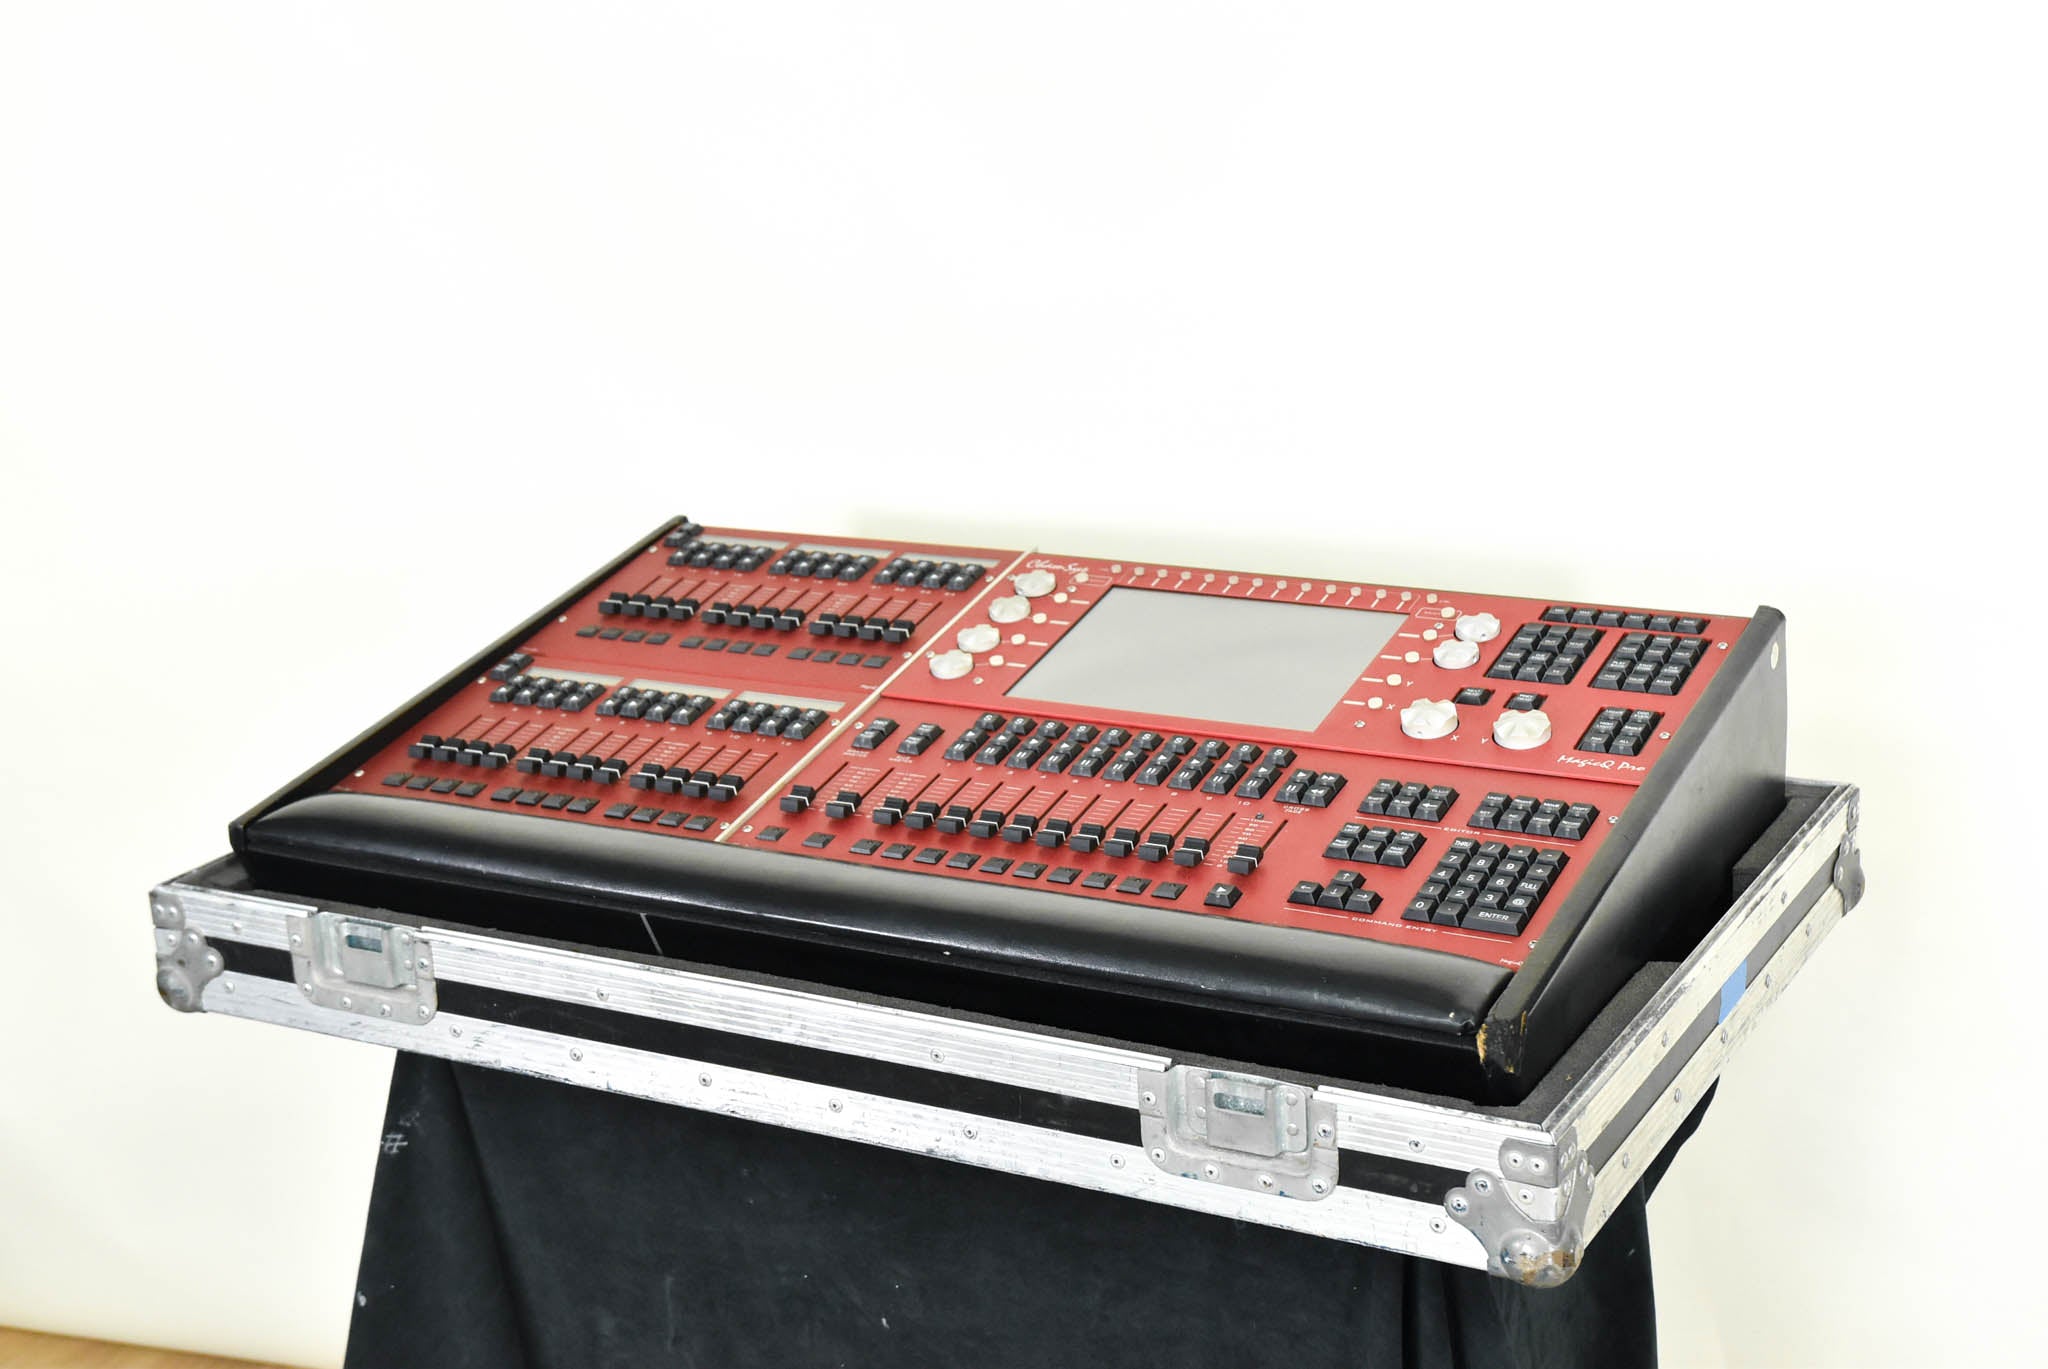 ChamSys MagicQ MQ200 Pro Lighting Control Console with Case